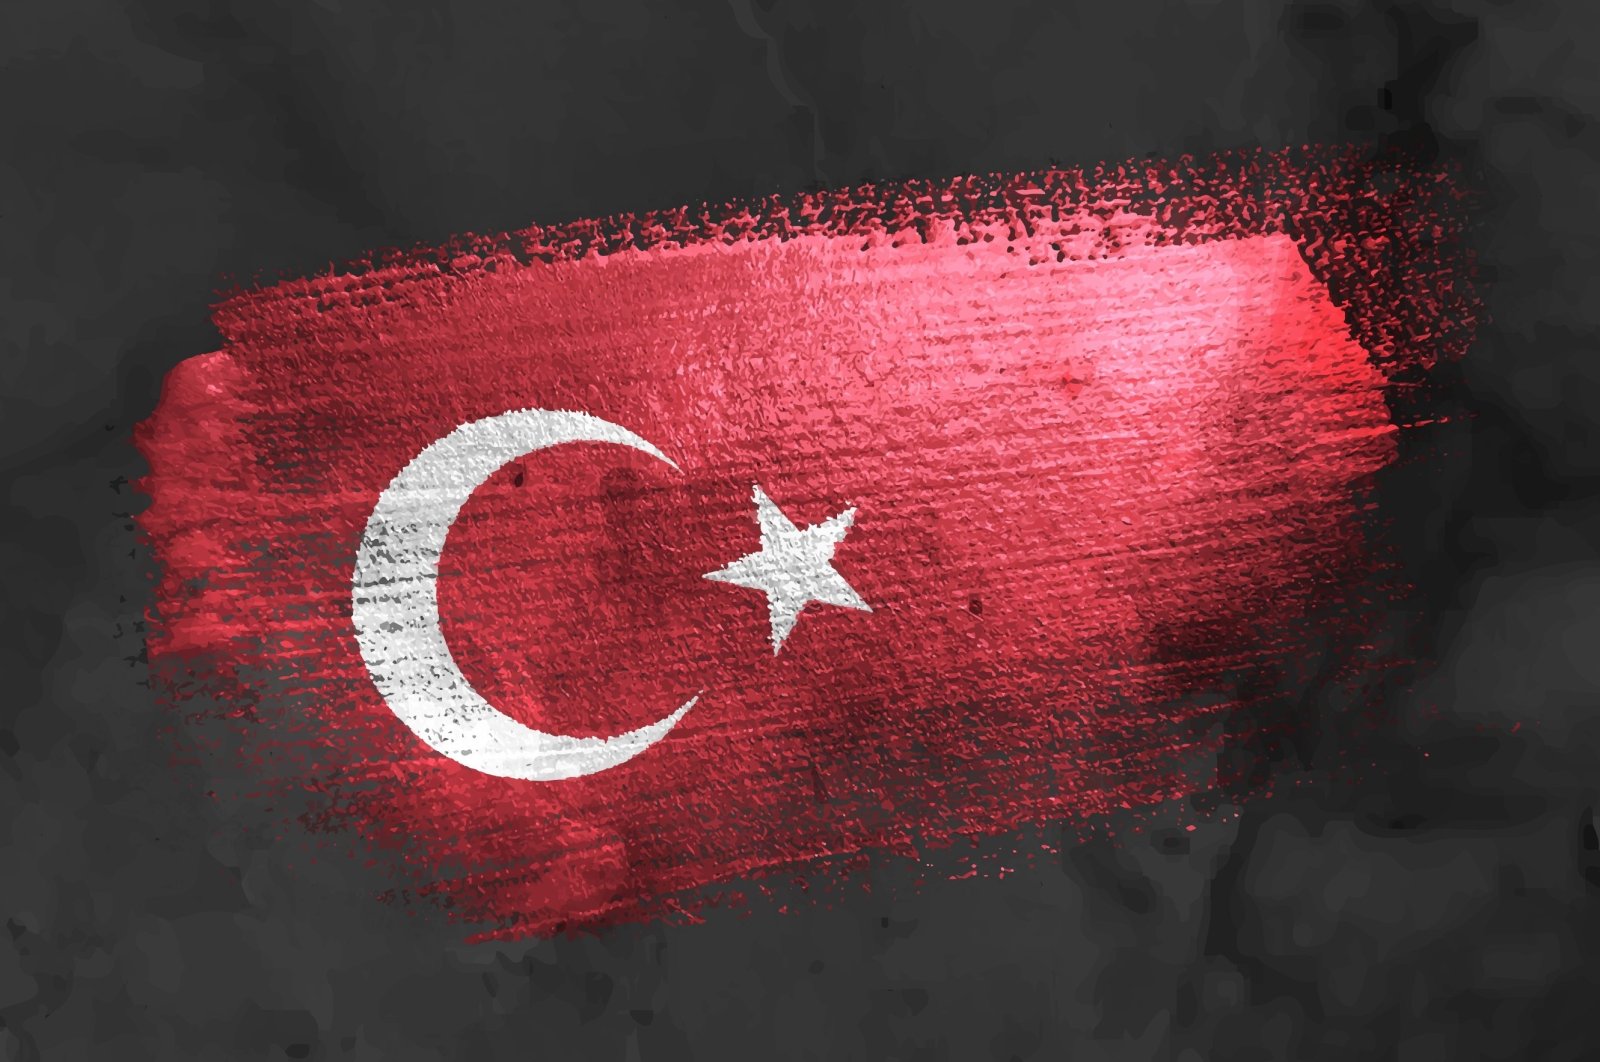 The most critical requirement for an organized understanding of foreign policy is for Türkiye to be able to interact with all actors on a regional and global scale and to develop sensible, adaptable policies that are consistent with its own national interests. (Illustration by Shutterstock)